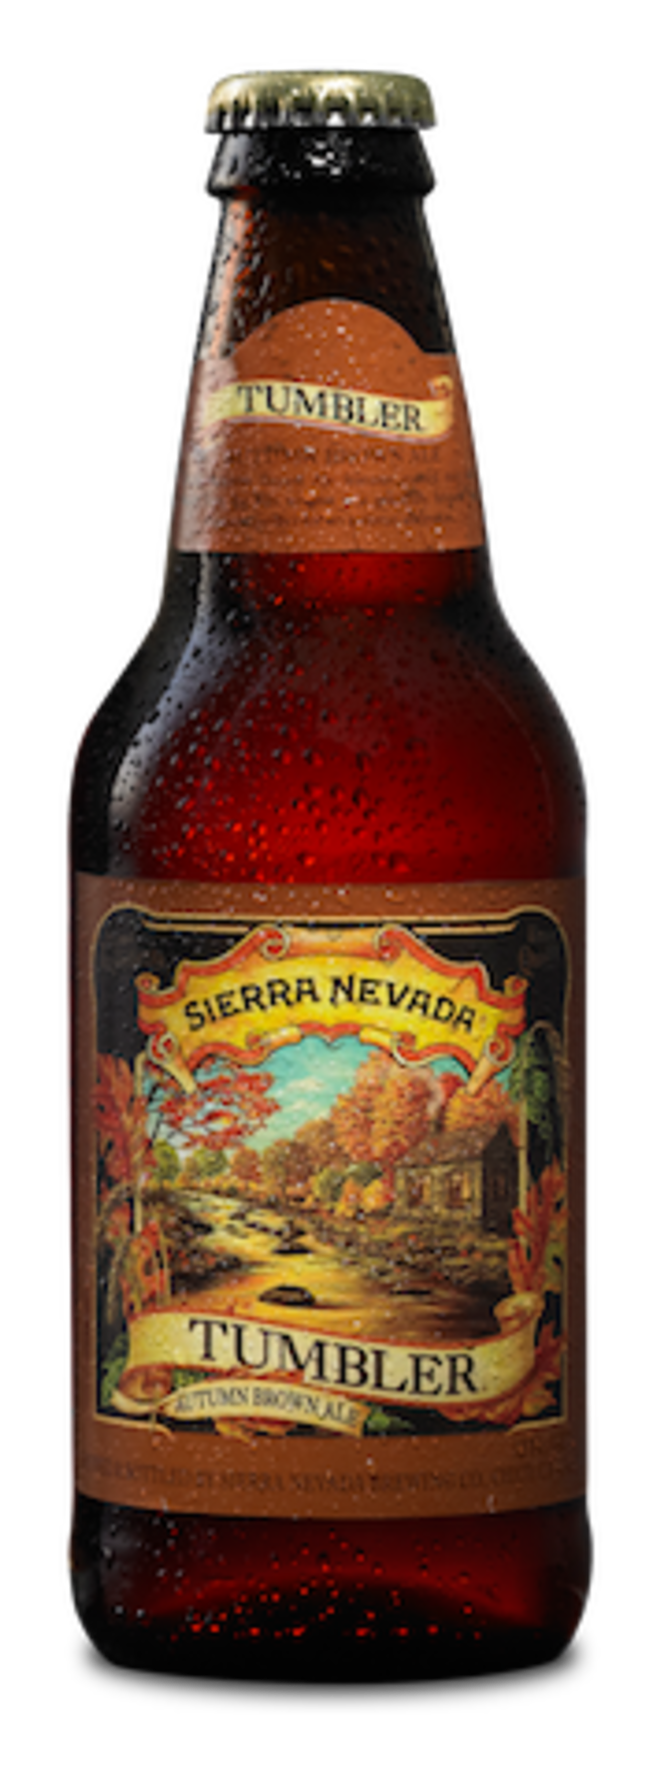 TUMBLER FOR YOU: Pick up a six-pack of Sierra Nevada Tumbler for a crisp fall brew. - TUMBLER FOR YOU: Pick up a six-pack of Sierra Nevada Tumbler for a crisp fall brew. - Sierra Nevada